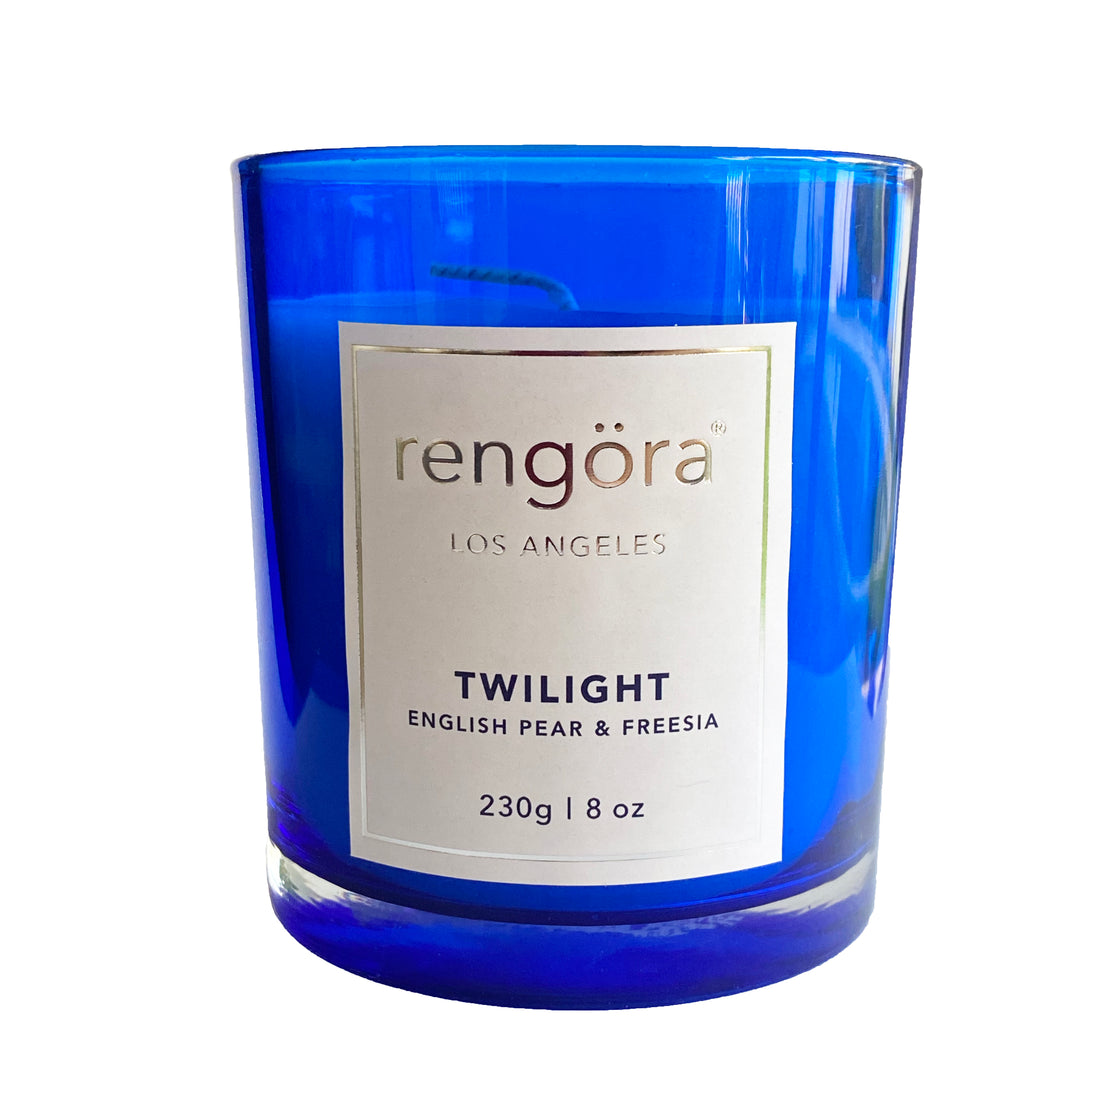 Against a pristine white background, the rengöra twilight scented home candle is elegantly showcased within its cobalt blue glass vessel, creating a striking visual contrast